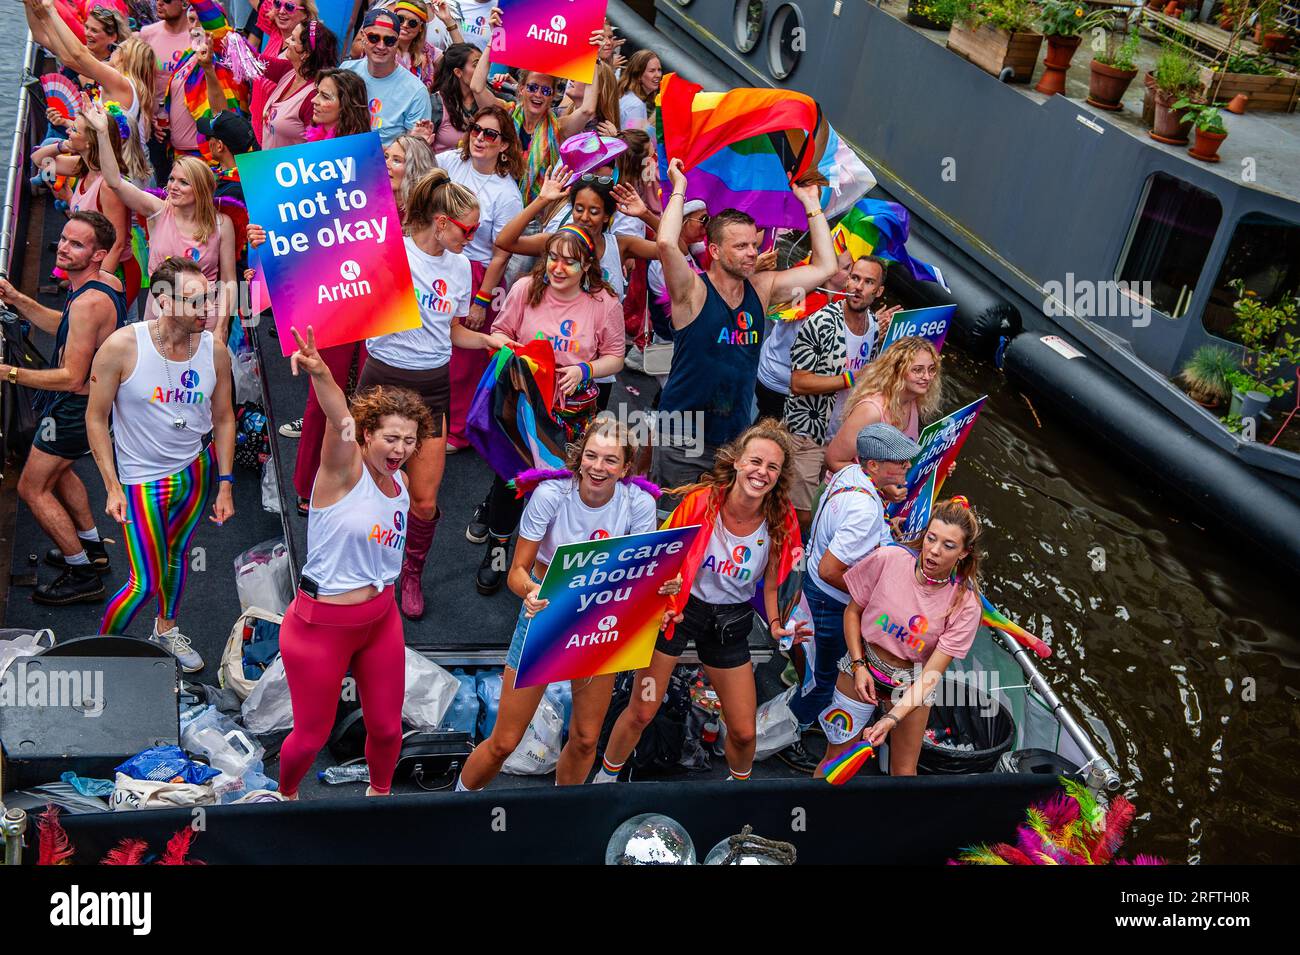 LGBT events in Amsterdam